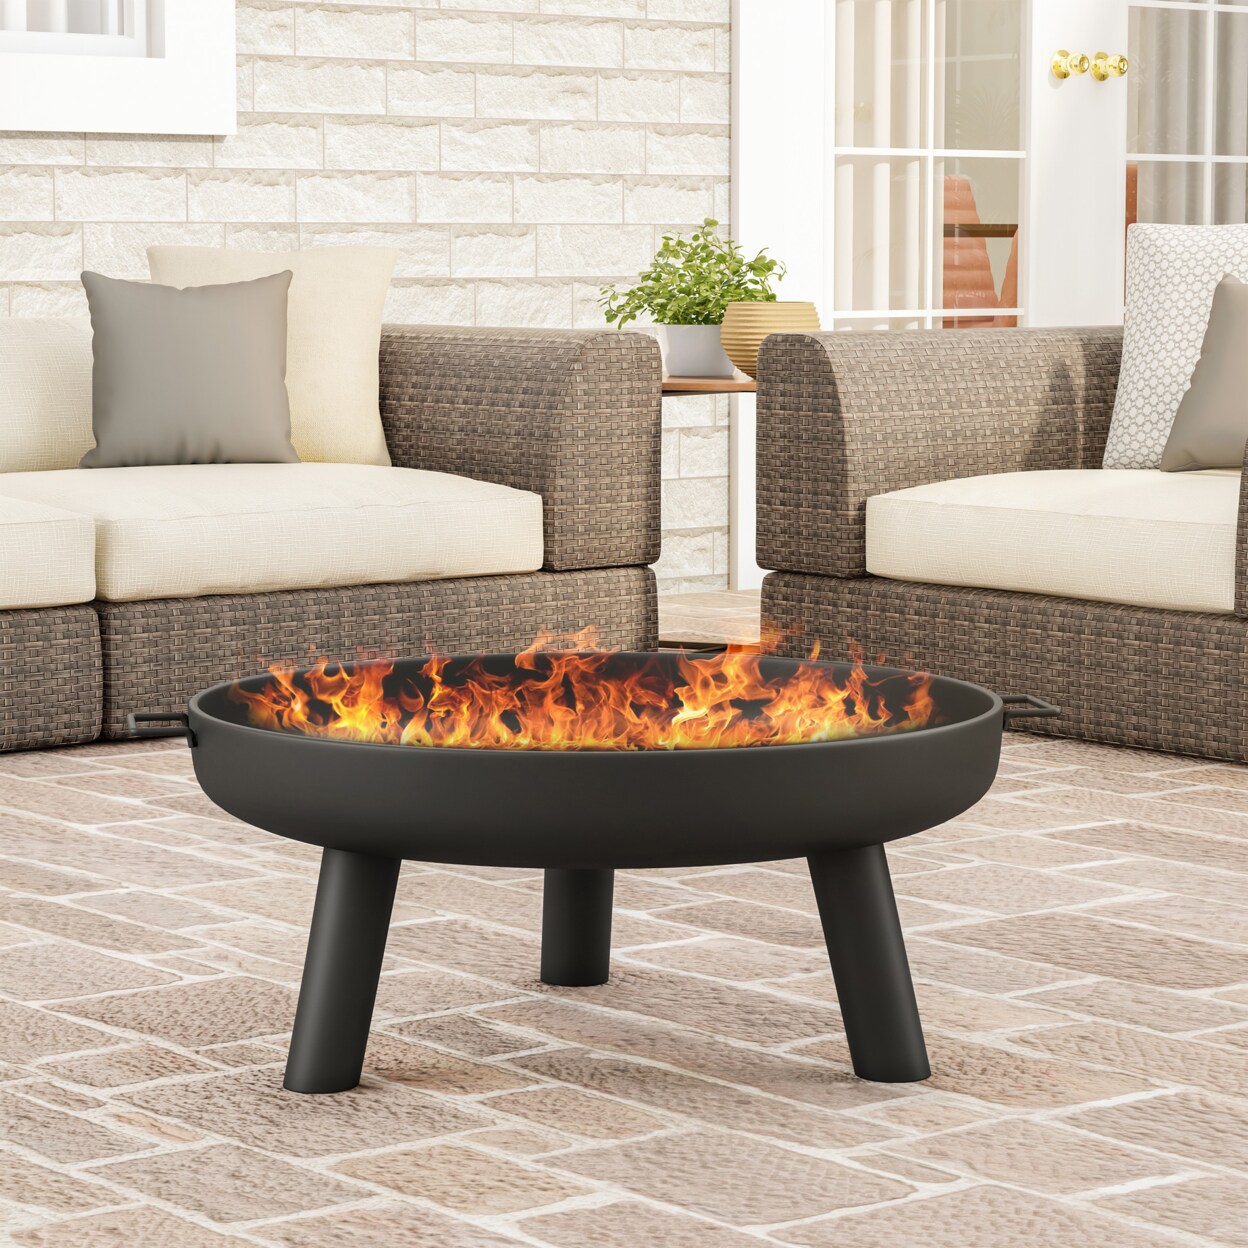 Pure Garden Outdoor Fire Pit- Raised Steel Bowl for Above Ground Wood Burning- Side Handles and Storage Cover- for Patios Backyards